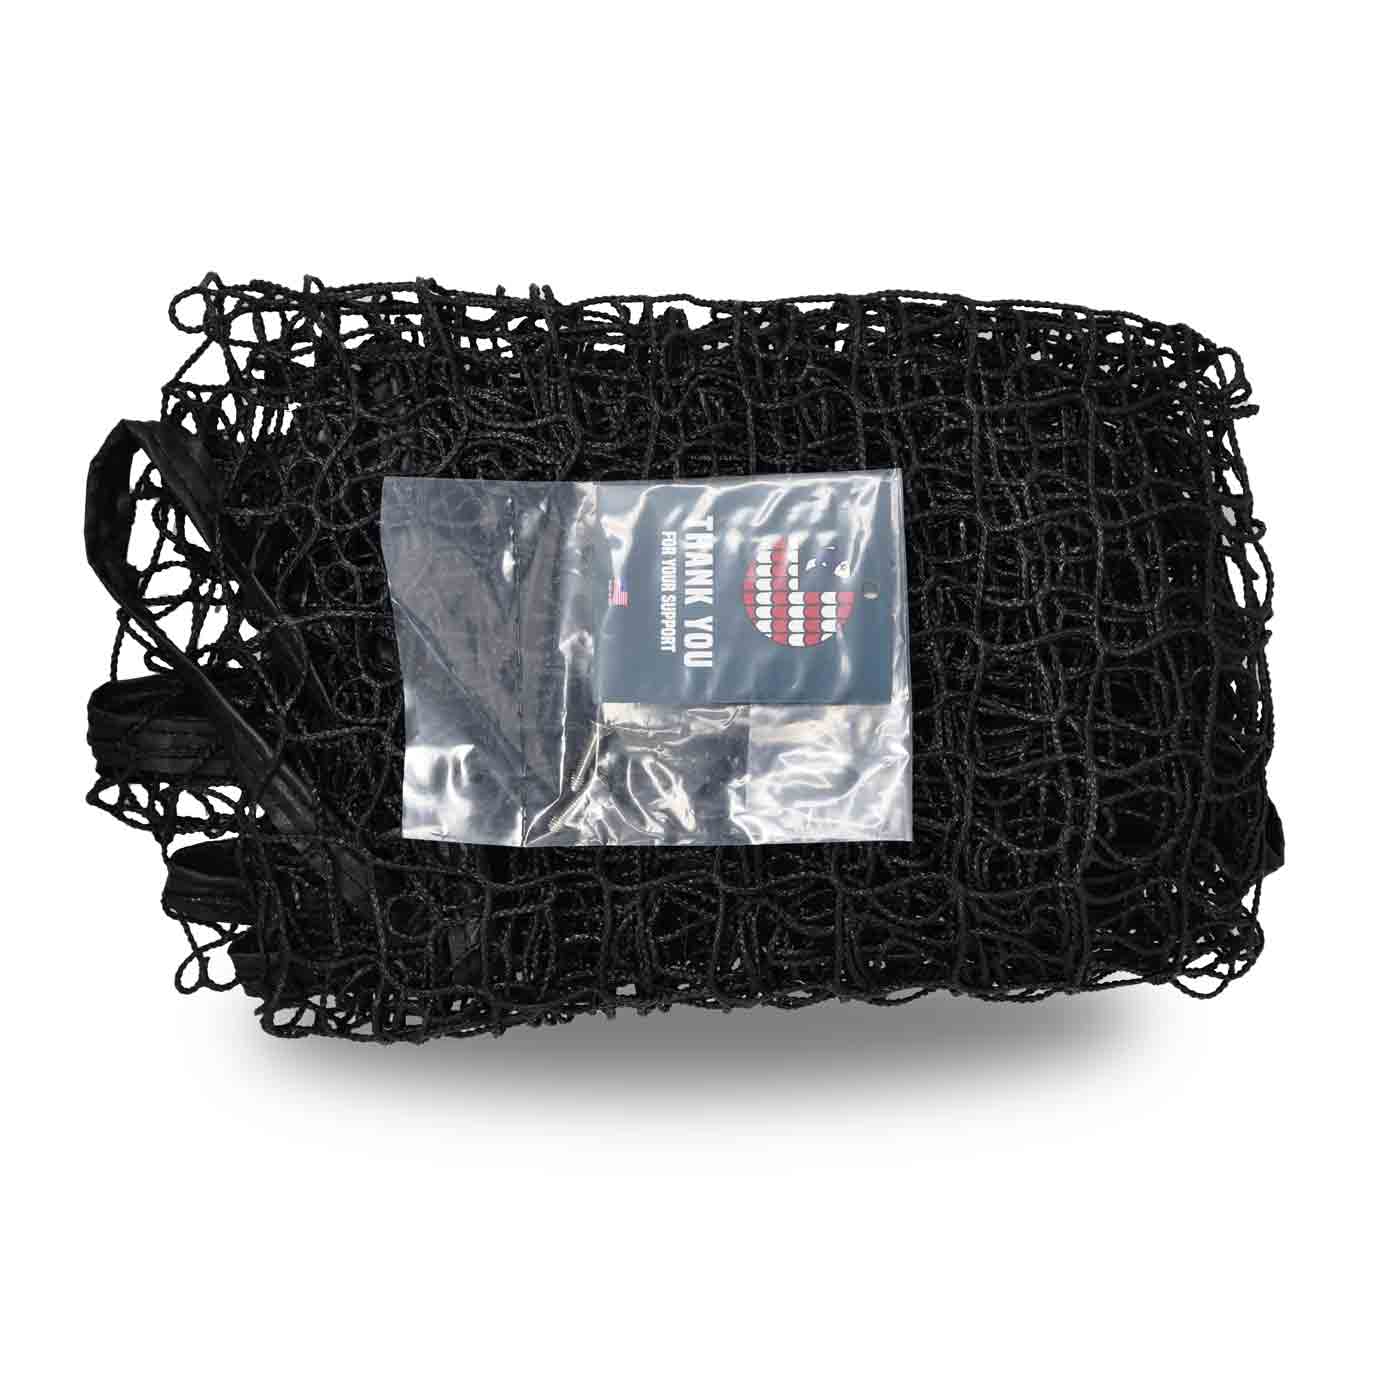 View of Nets RS Nets Solo Slimer Spare available at EZOKO Pike and Musky Shop